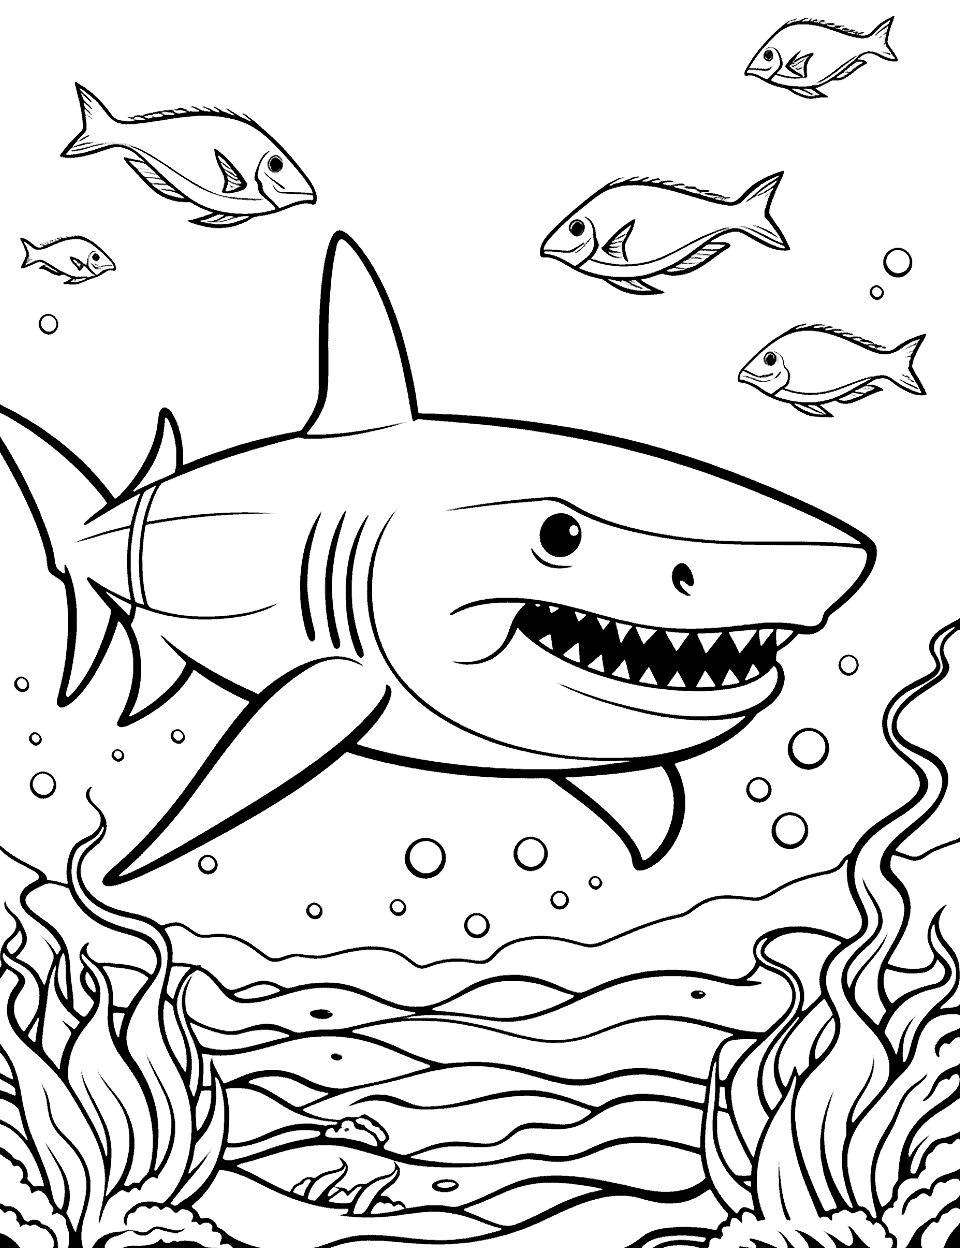 King Shark and His Kingdom Coloring Page - King Shark watching over his ocean kingdom, filled with other sea creatures.